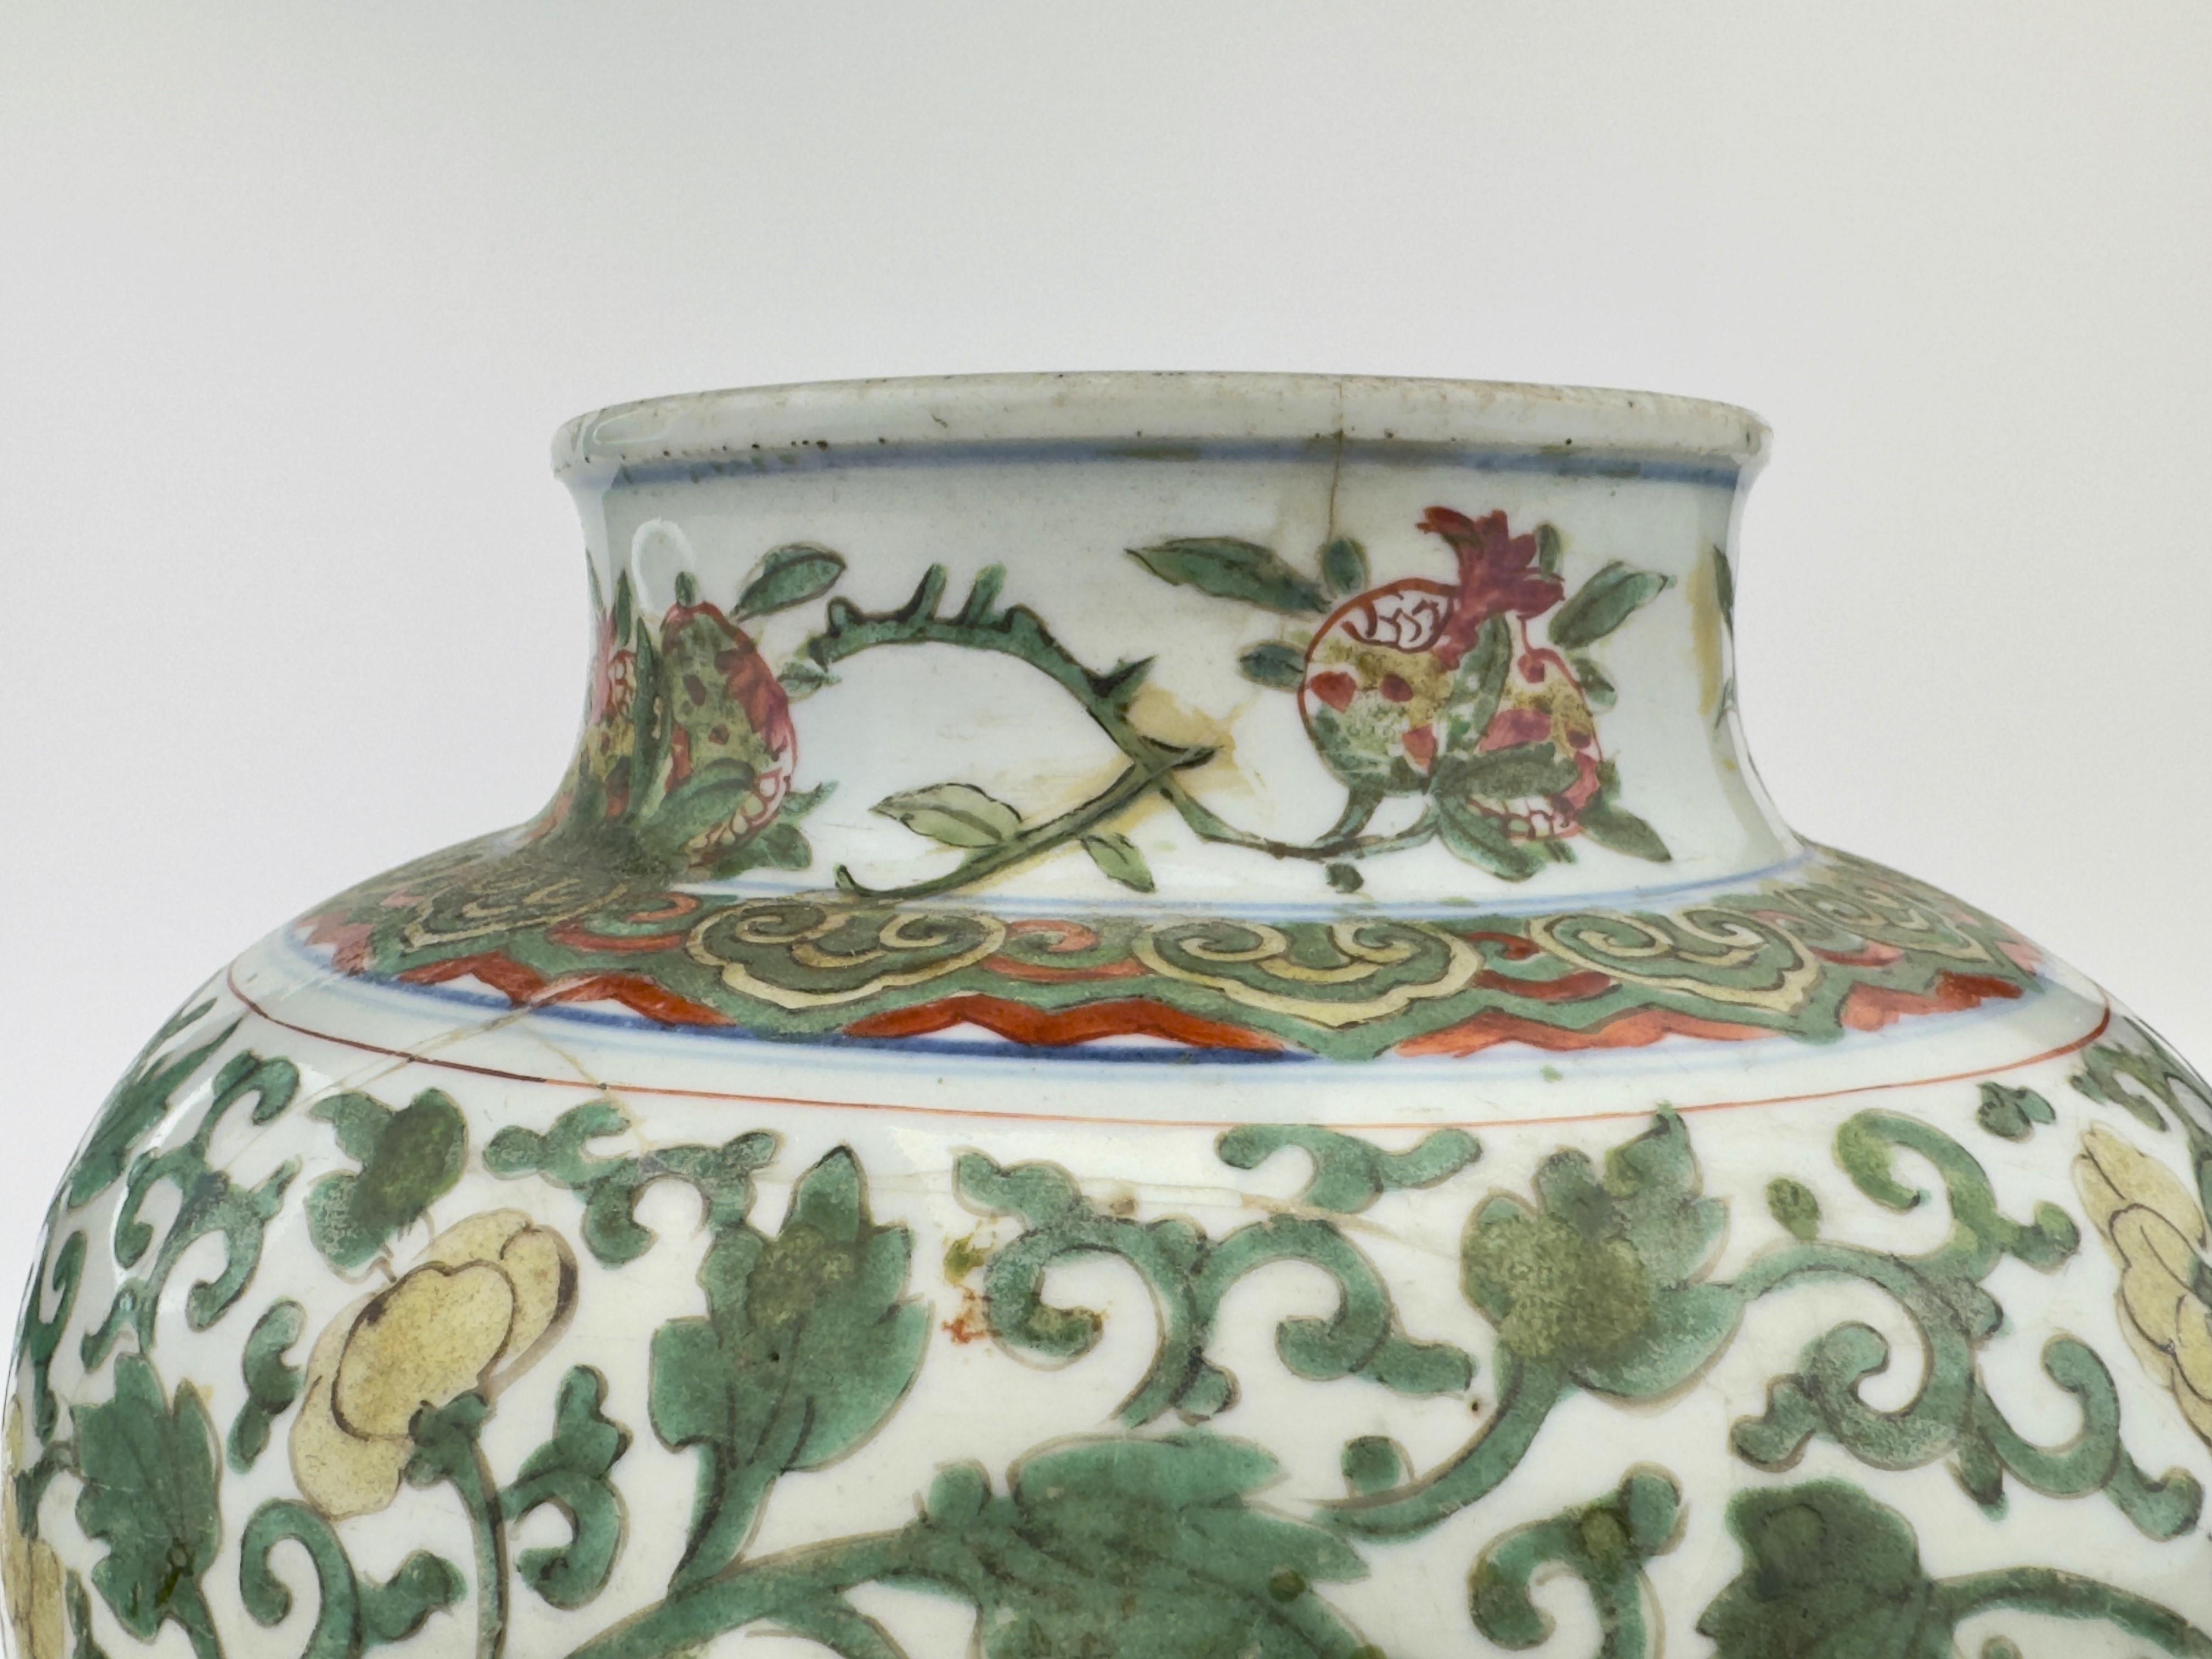 Ceramic A Wucai 'Peony' Vase Transitional Period, 17th century, Early Qing Dynasty For Sale